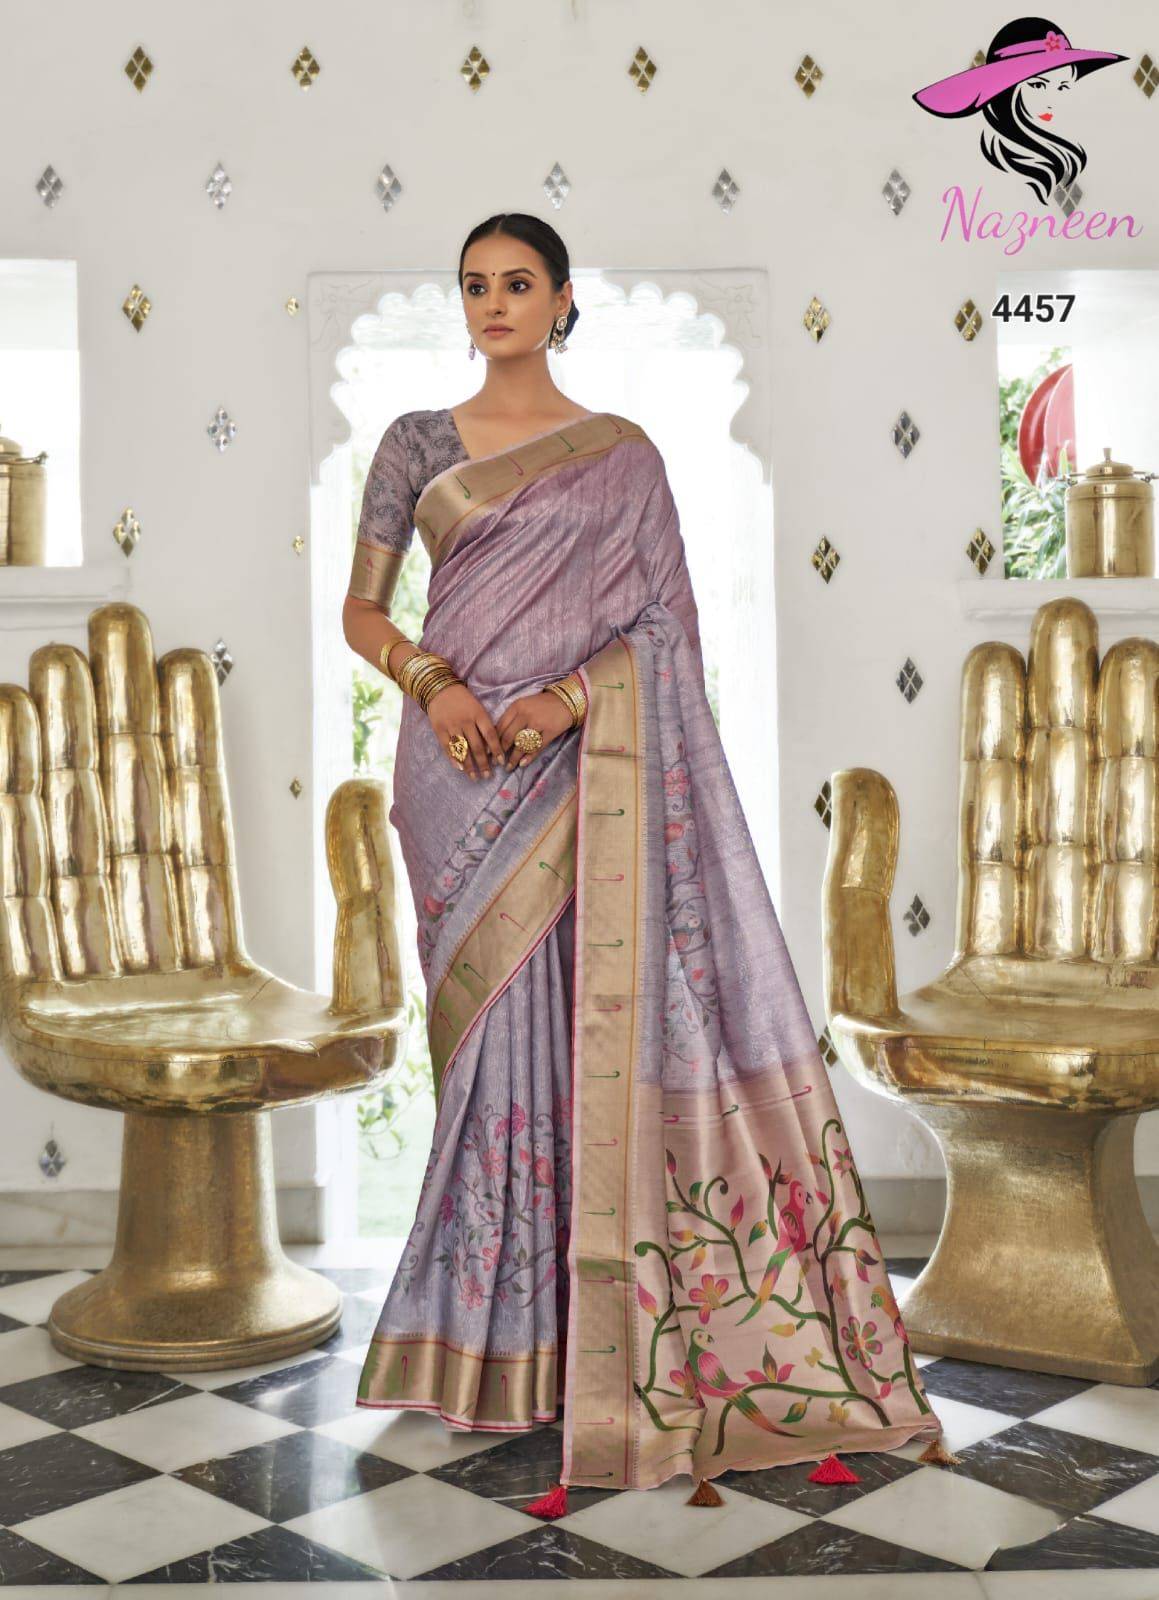 Mandakini By Nazneen 4451 To 4458 Series Indian Traditional Wear Collection Beautiful Stylish Fancy Colorful Party Wear & Occasional Wear Fancy Sarees At Wholesale Price